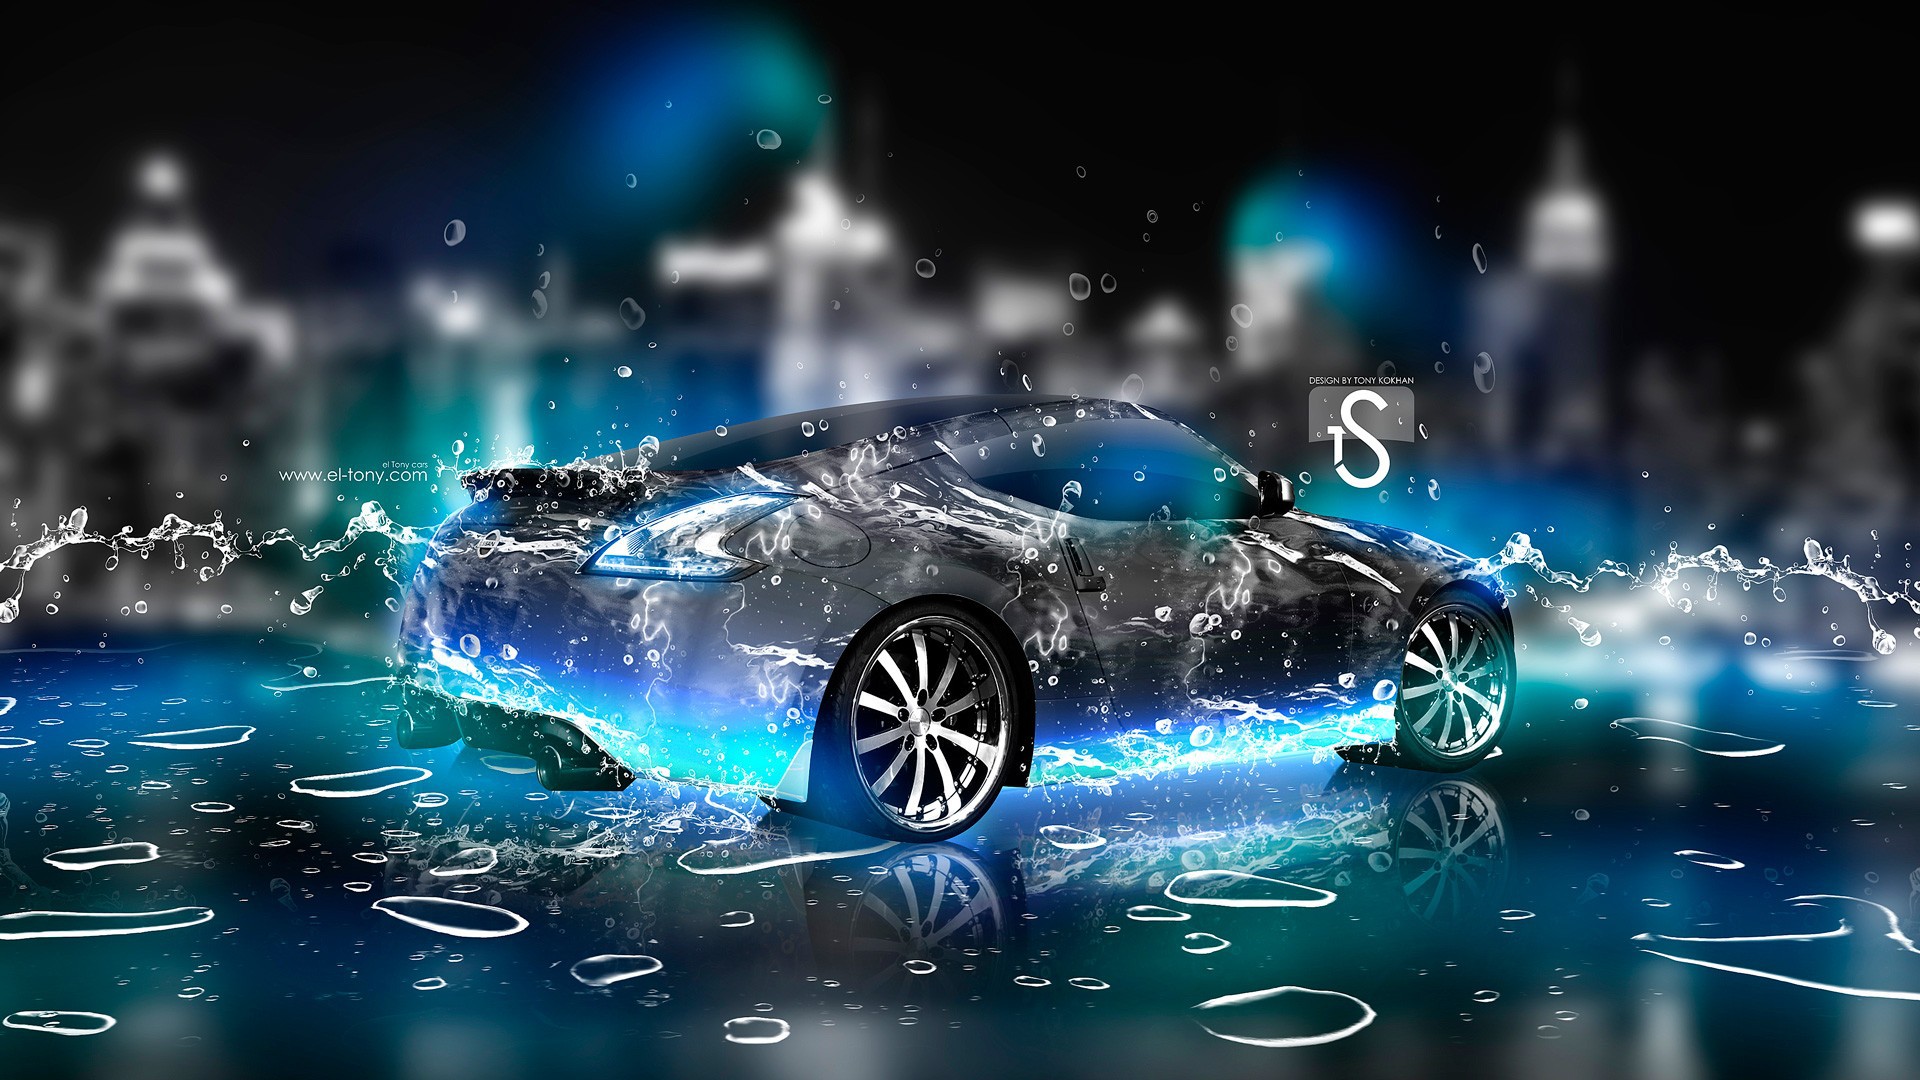 Nissan digital water droplets wallpapers and images - wallpapers ...